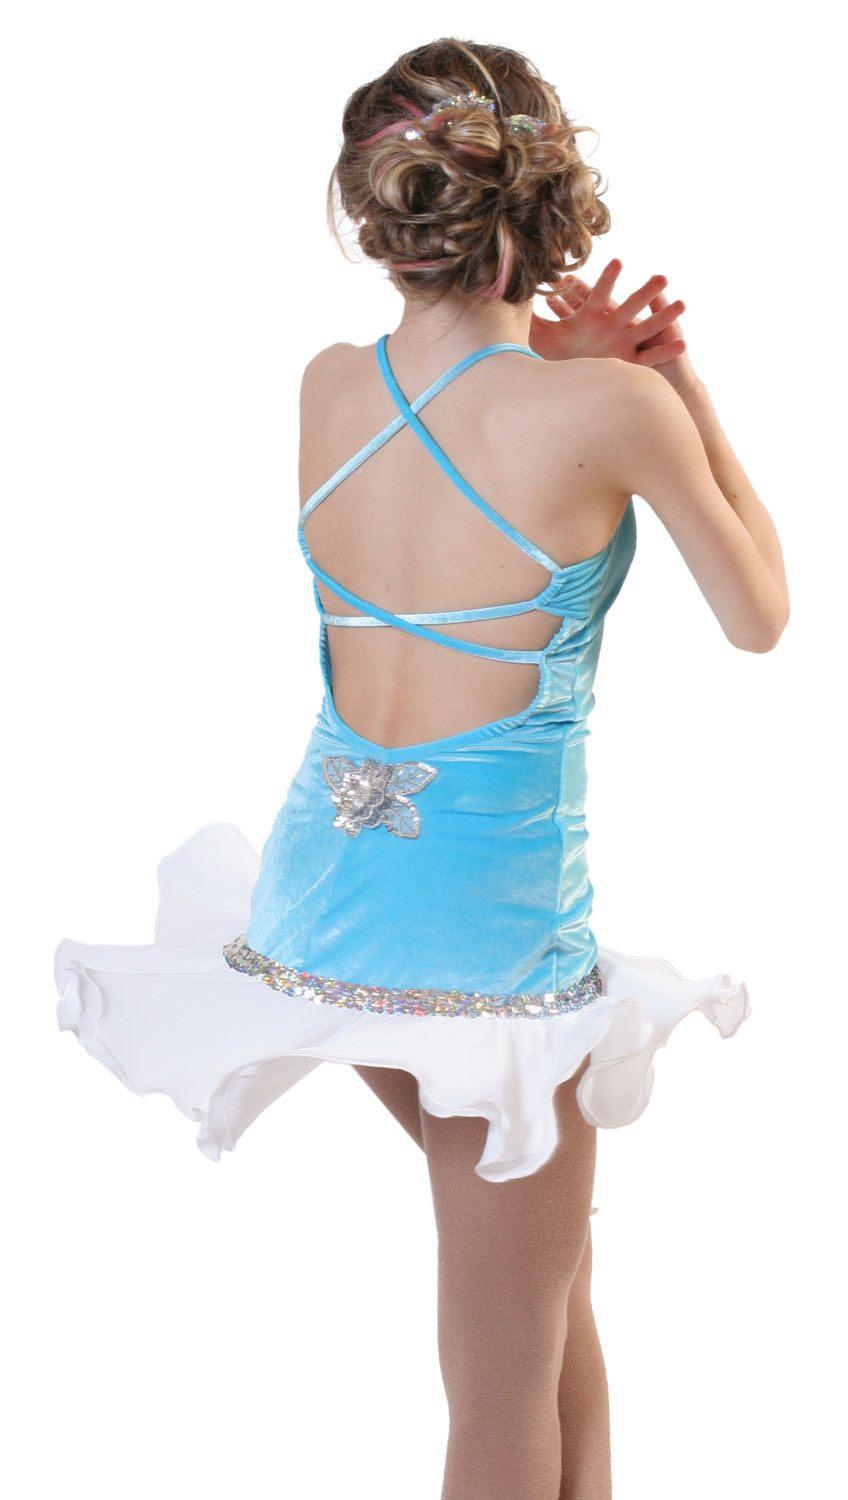 Jalie 2789 - Laced-up back skating dress with chiffon skirt